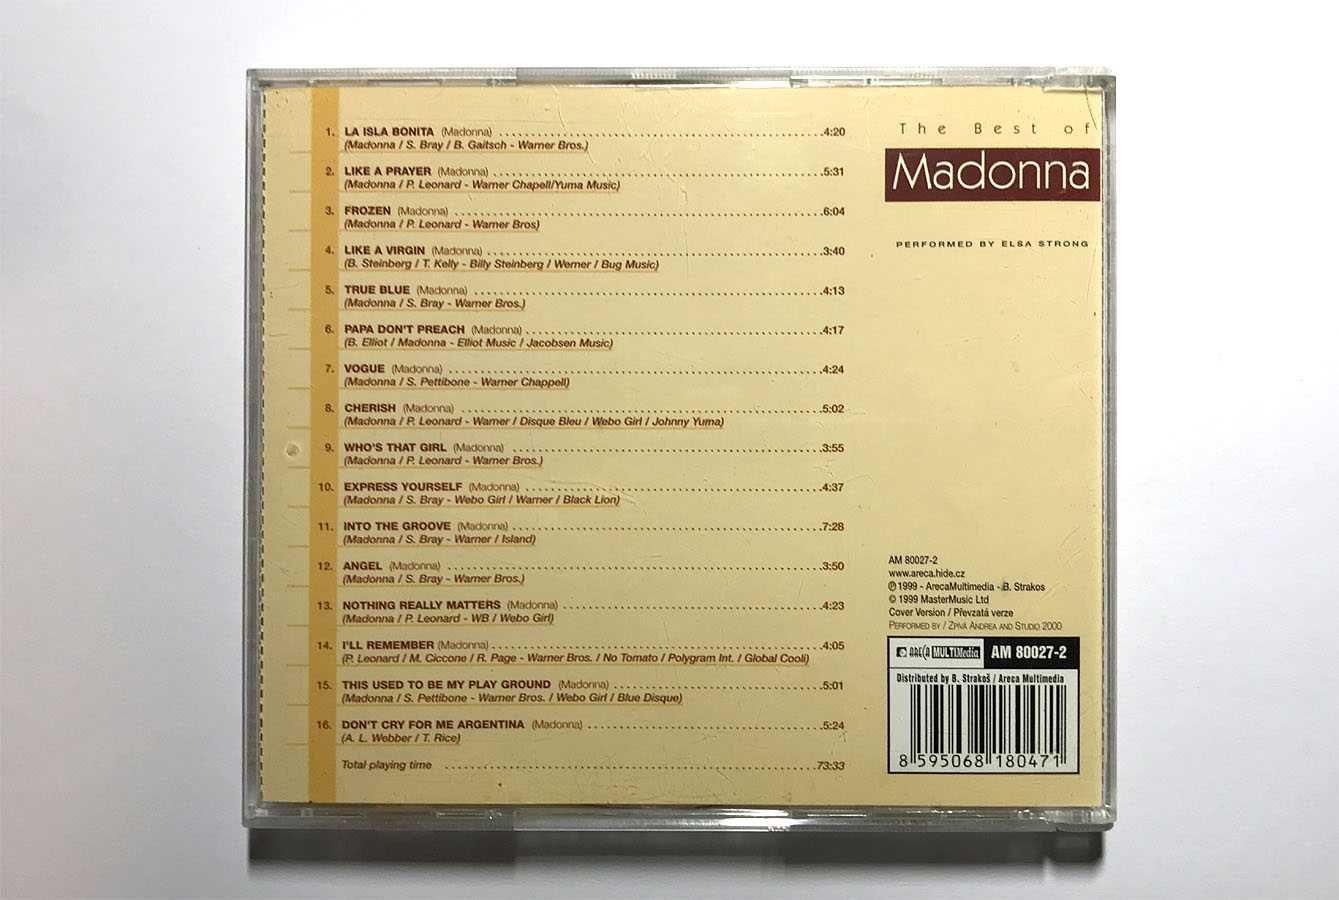 The Best of MADONNA - Cover Version by ANDREA - 1999 Czechy